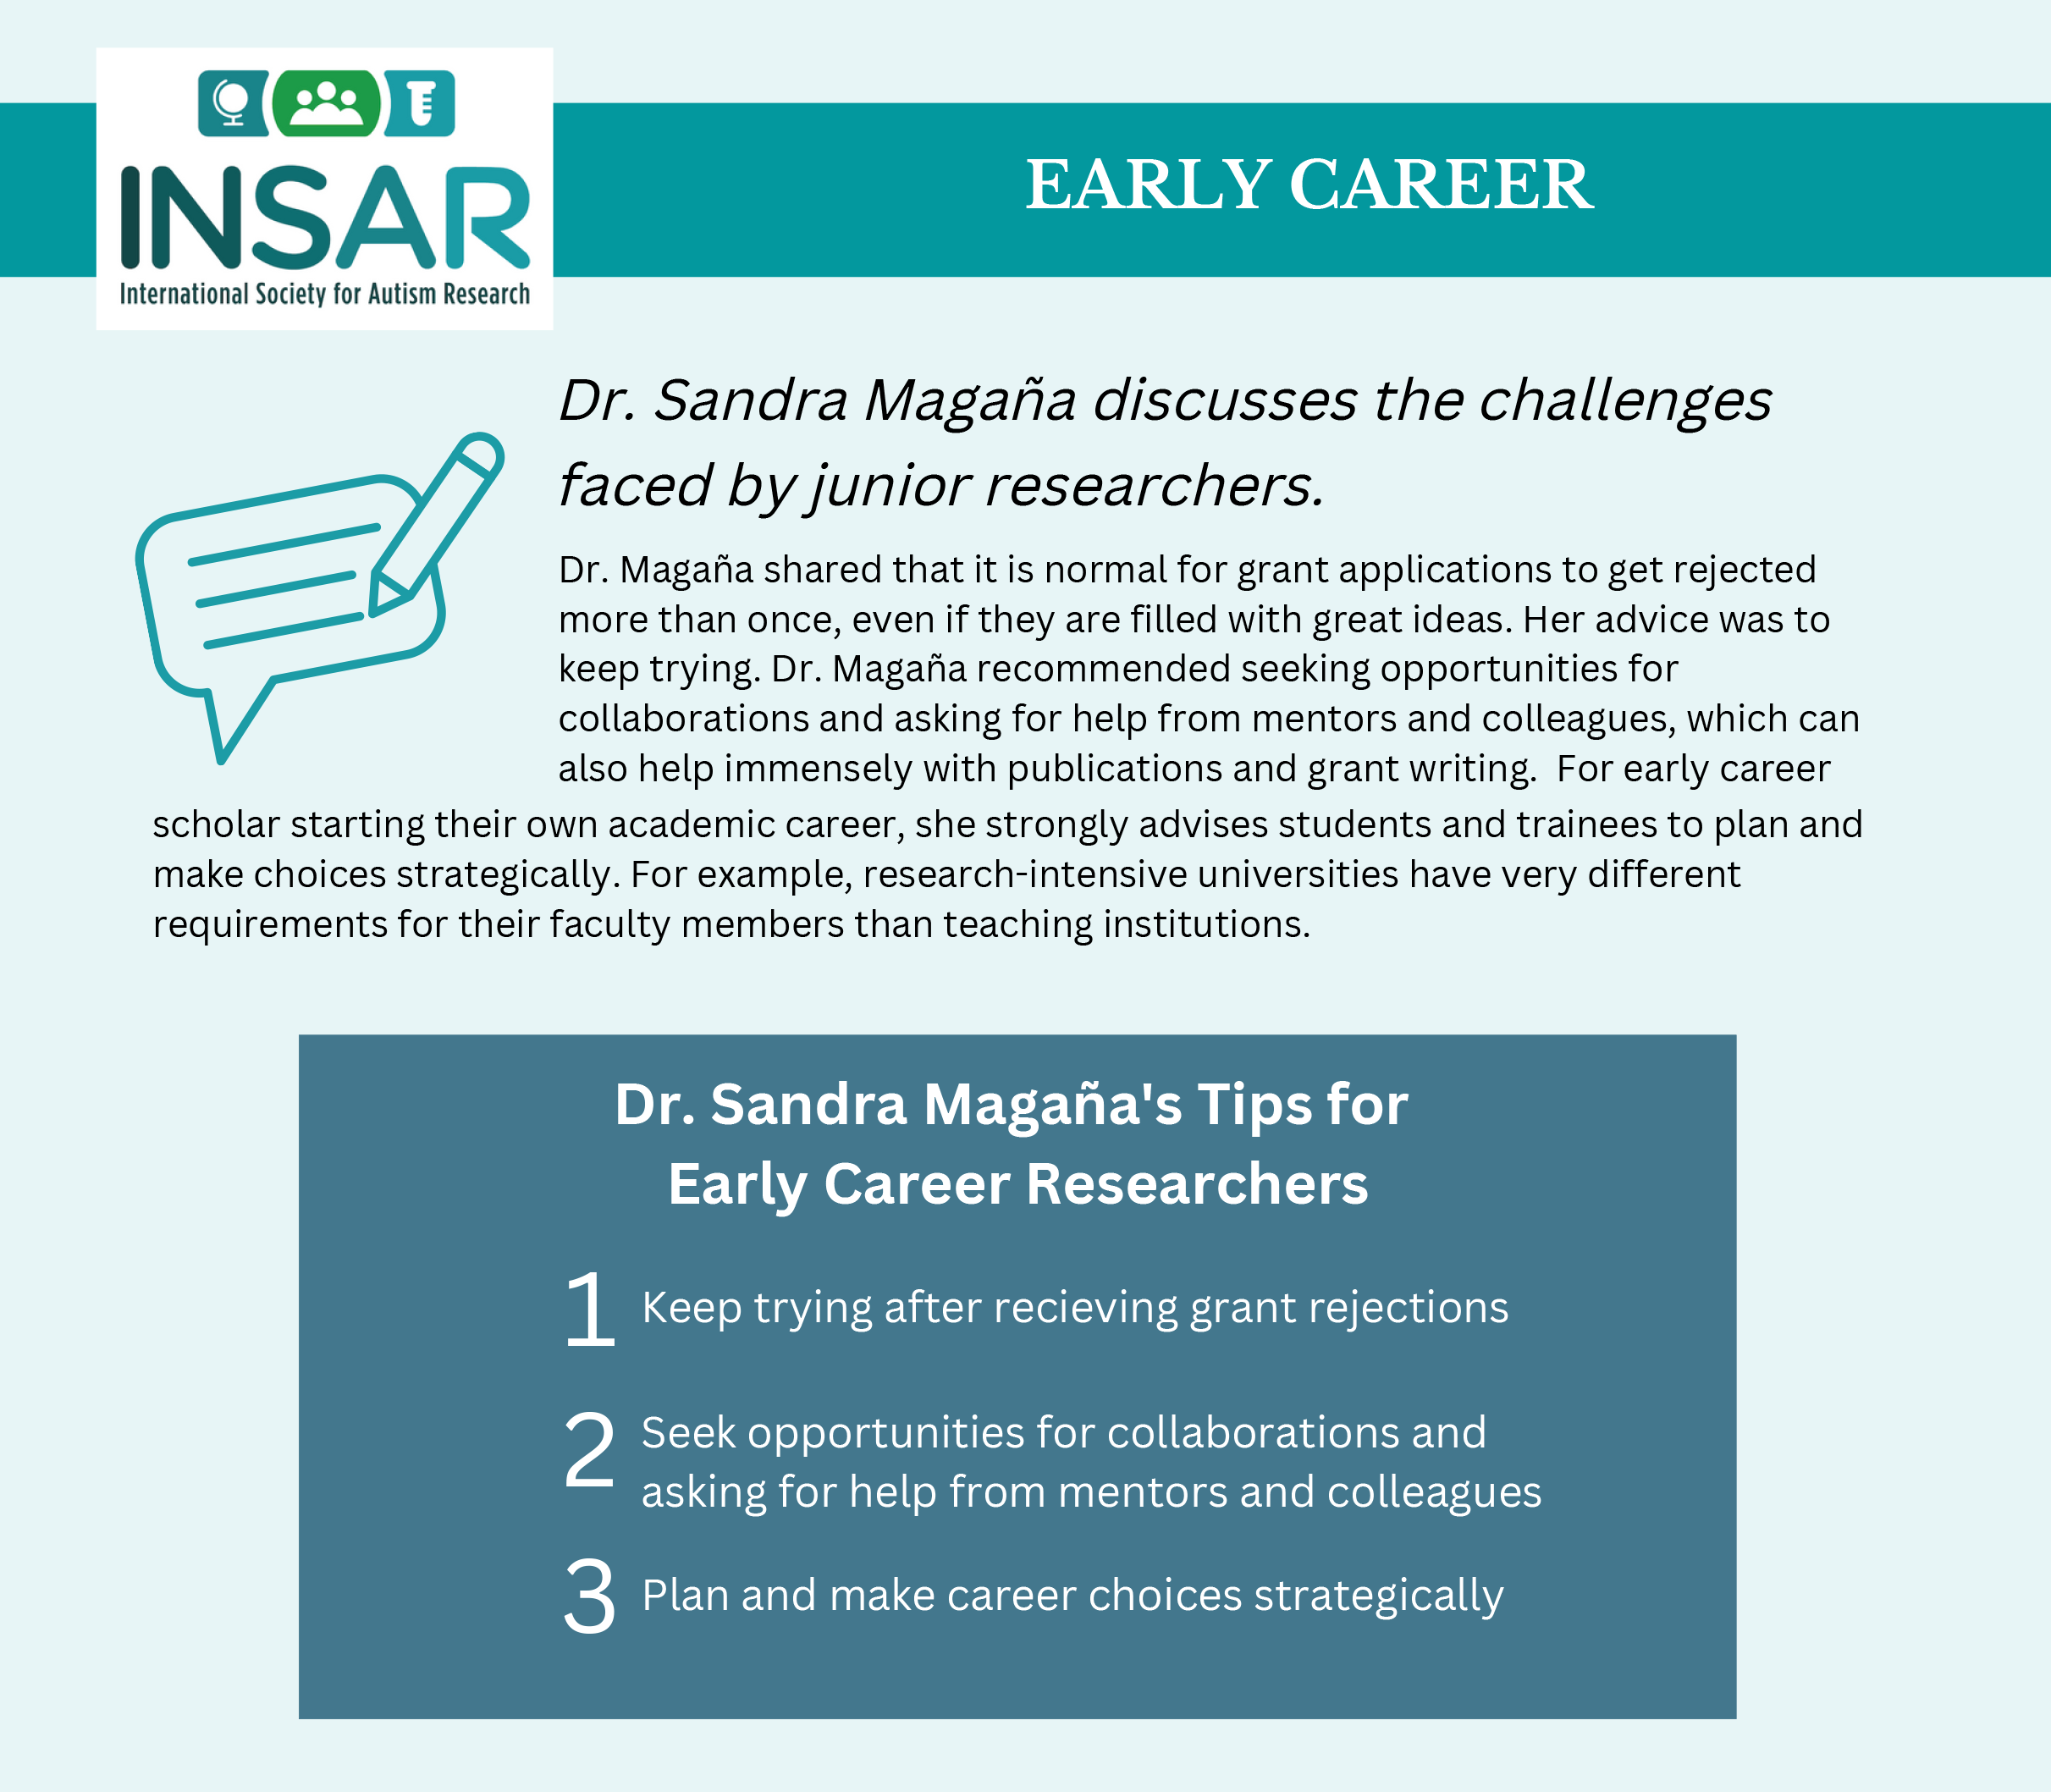 Image of Dr. Sandra Magaña's Trips for Early Career Researchers; Please see Plain Text on page below.